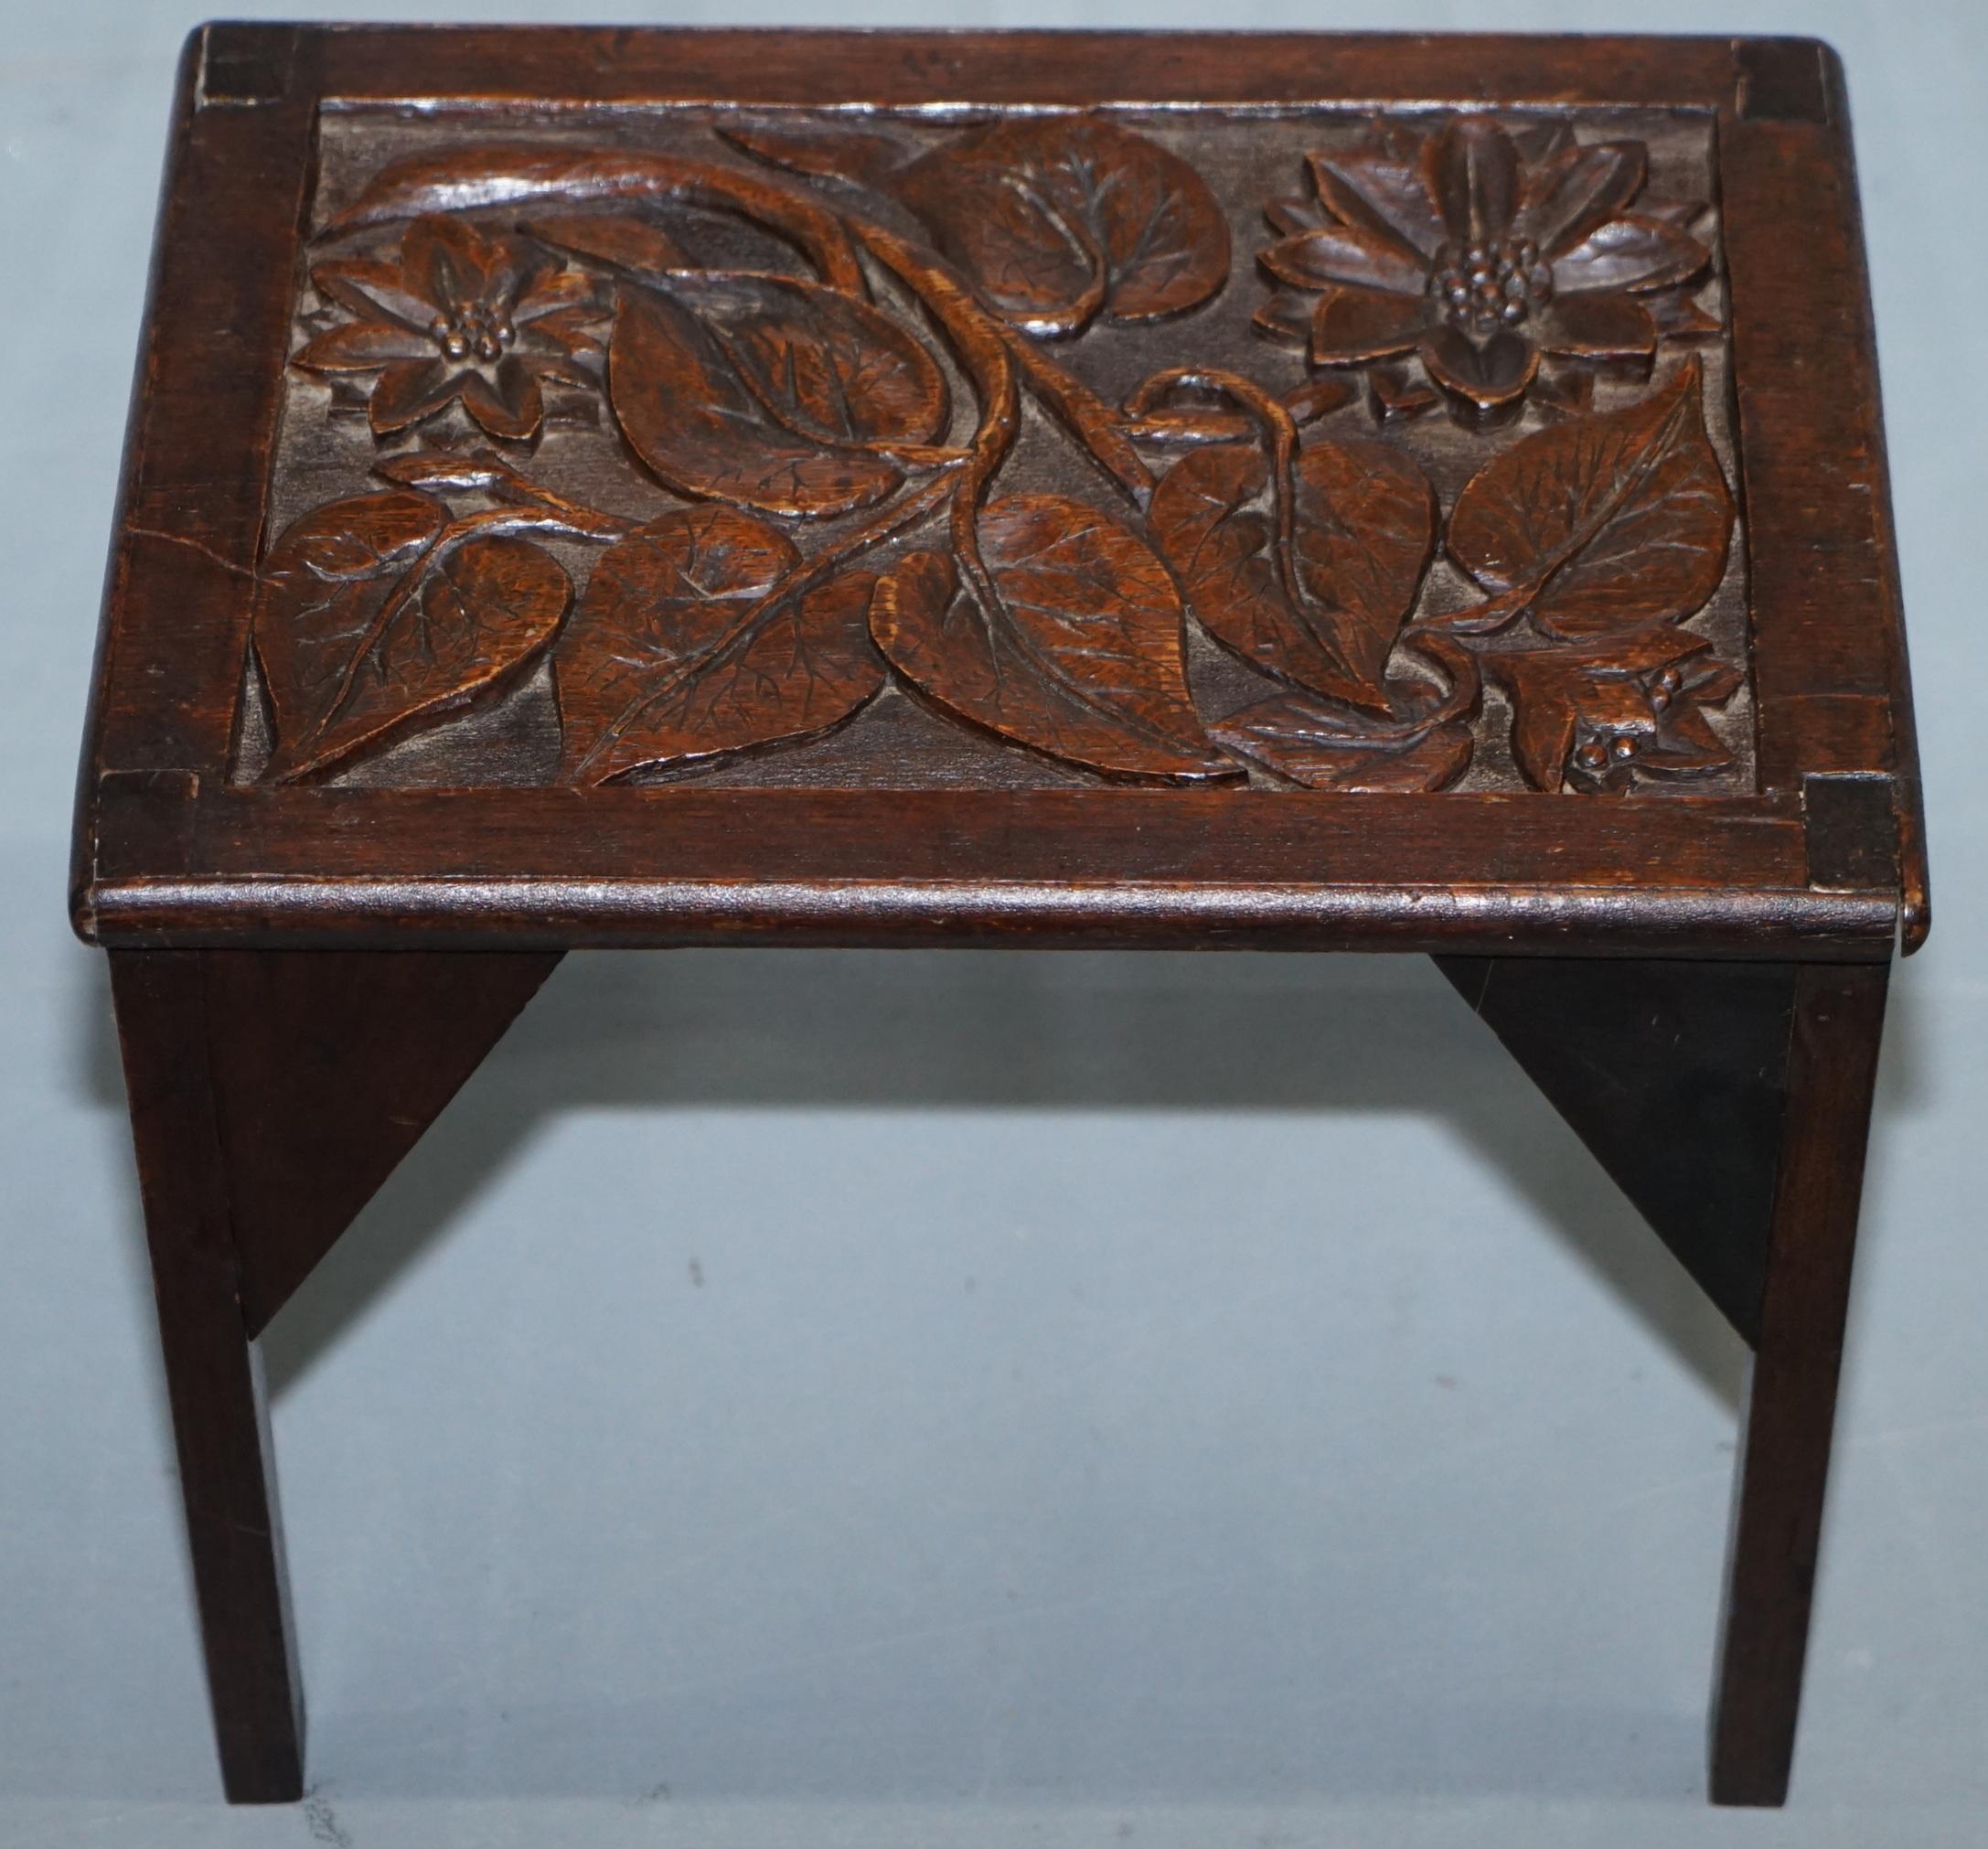 We are delighted to offer for sale this lovely little Liberty’s London hand carved side table

Please note the delivery fee listed is just a guide, it covers within the M25 only

A very good looking and well-made piece, ideally suited to sit